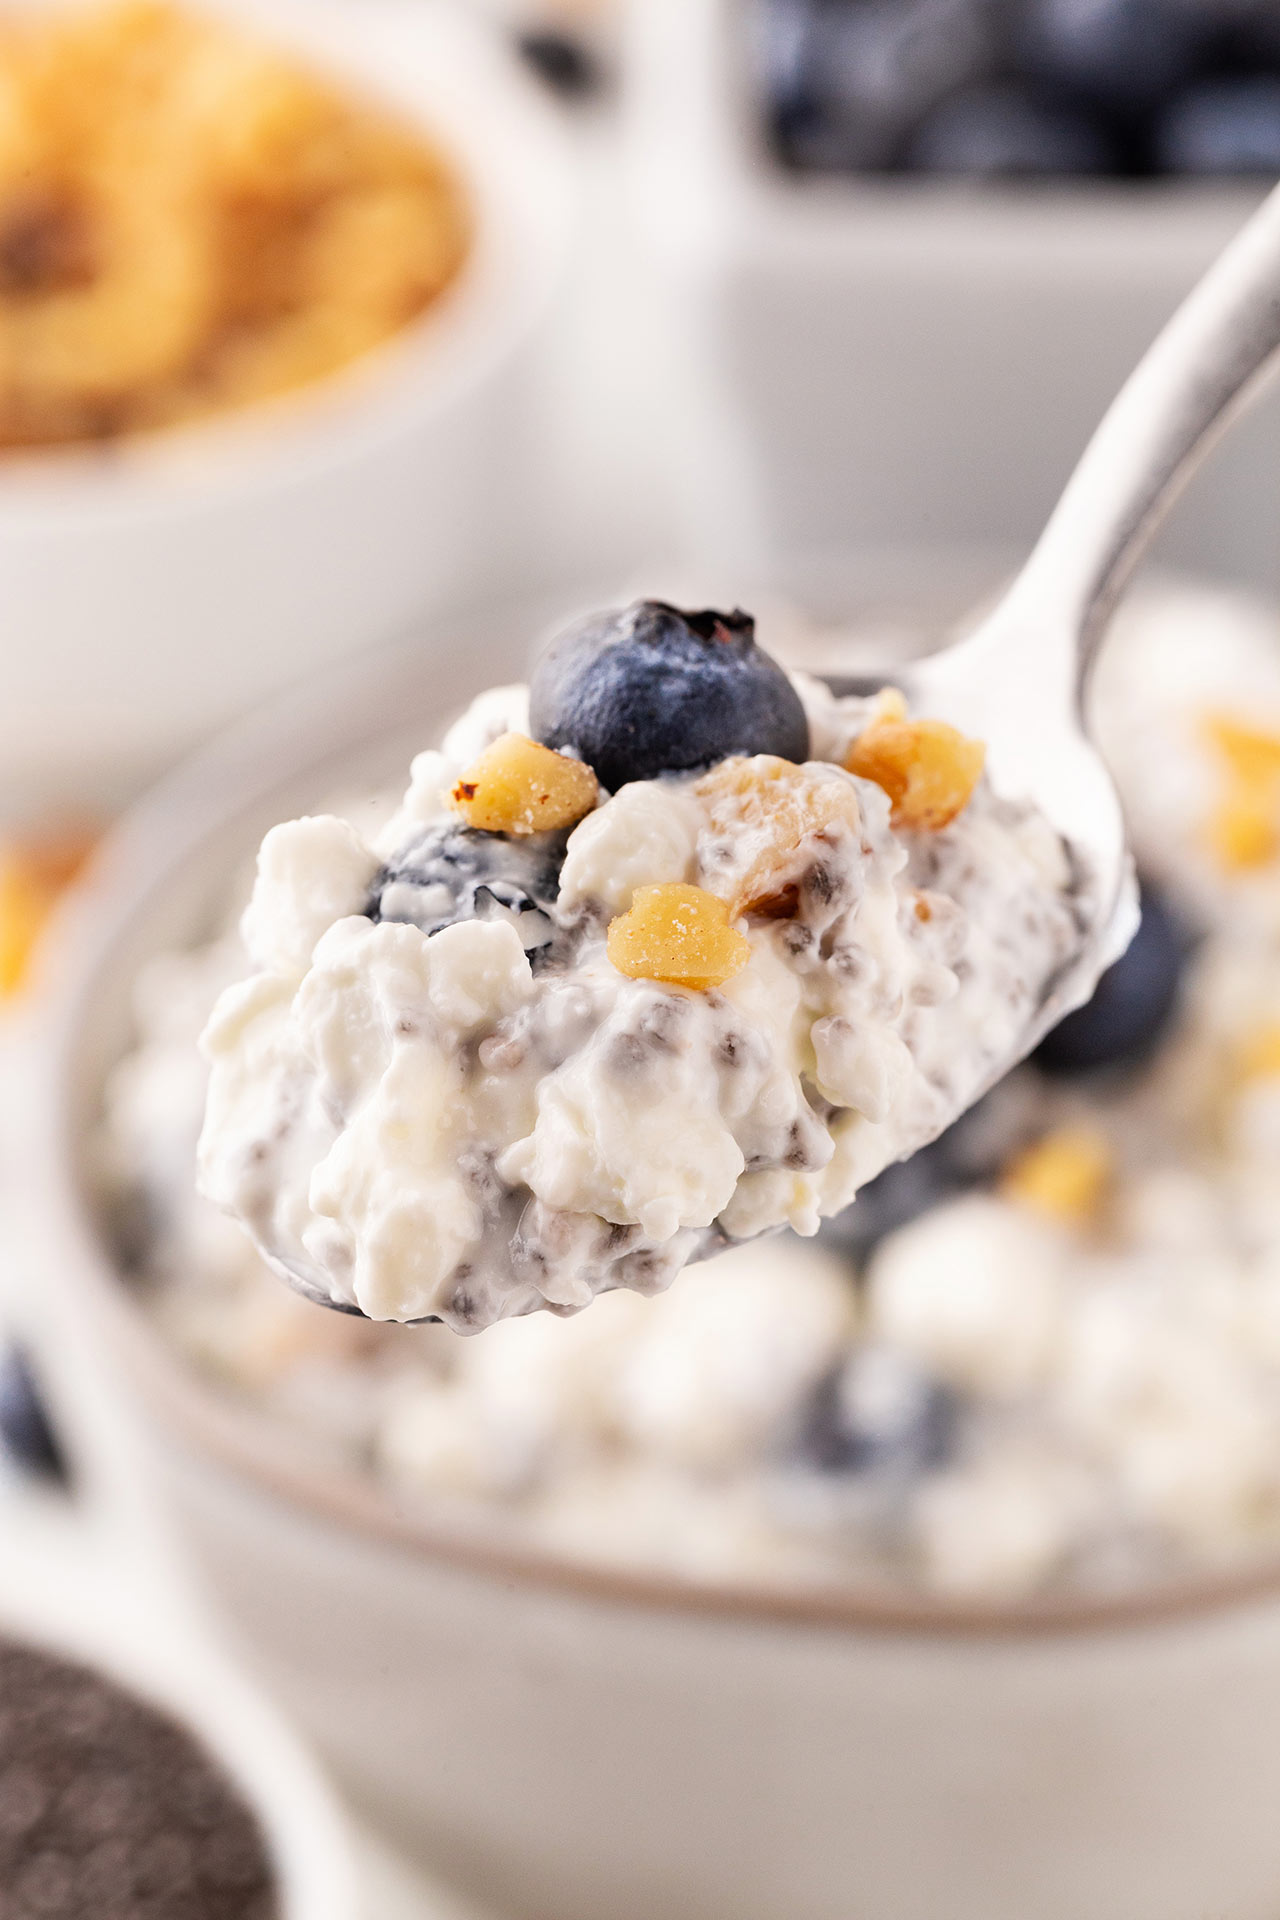 A spoon lifts a spoonful of blueberry cottage cheese out of a bowl.